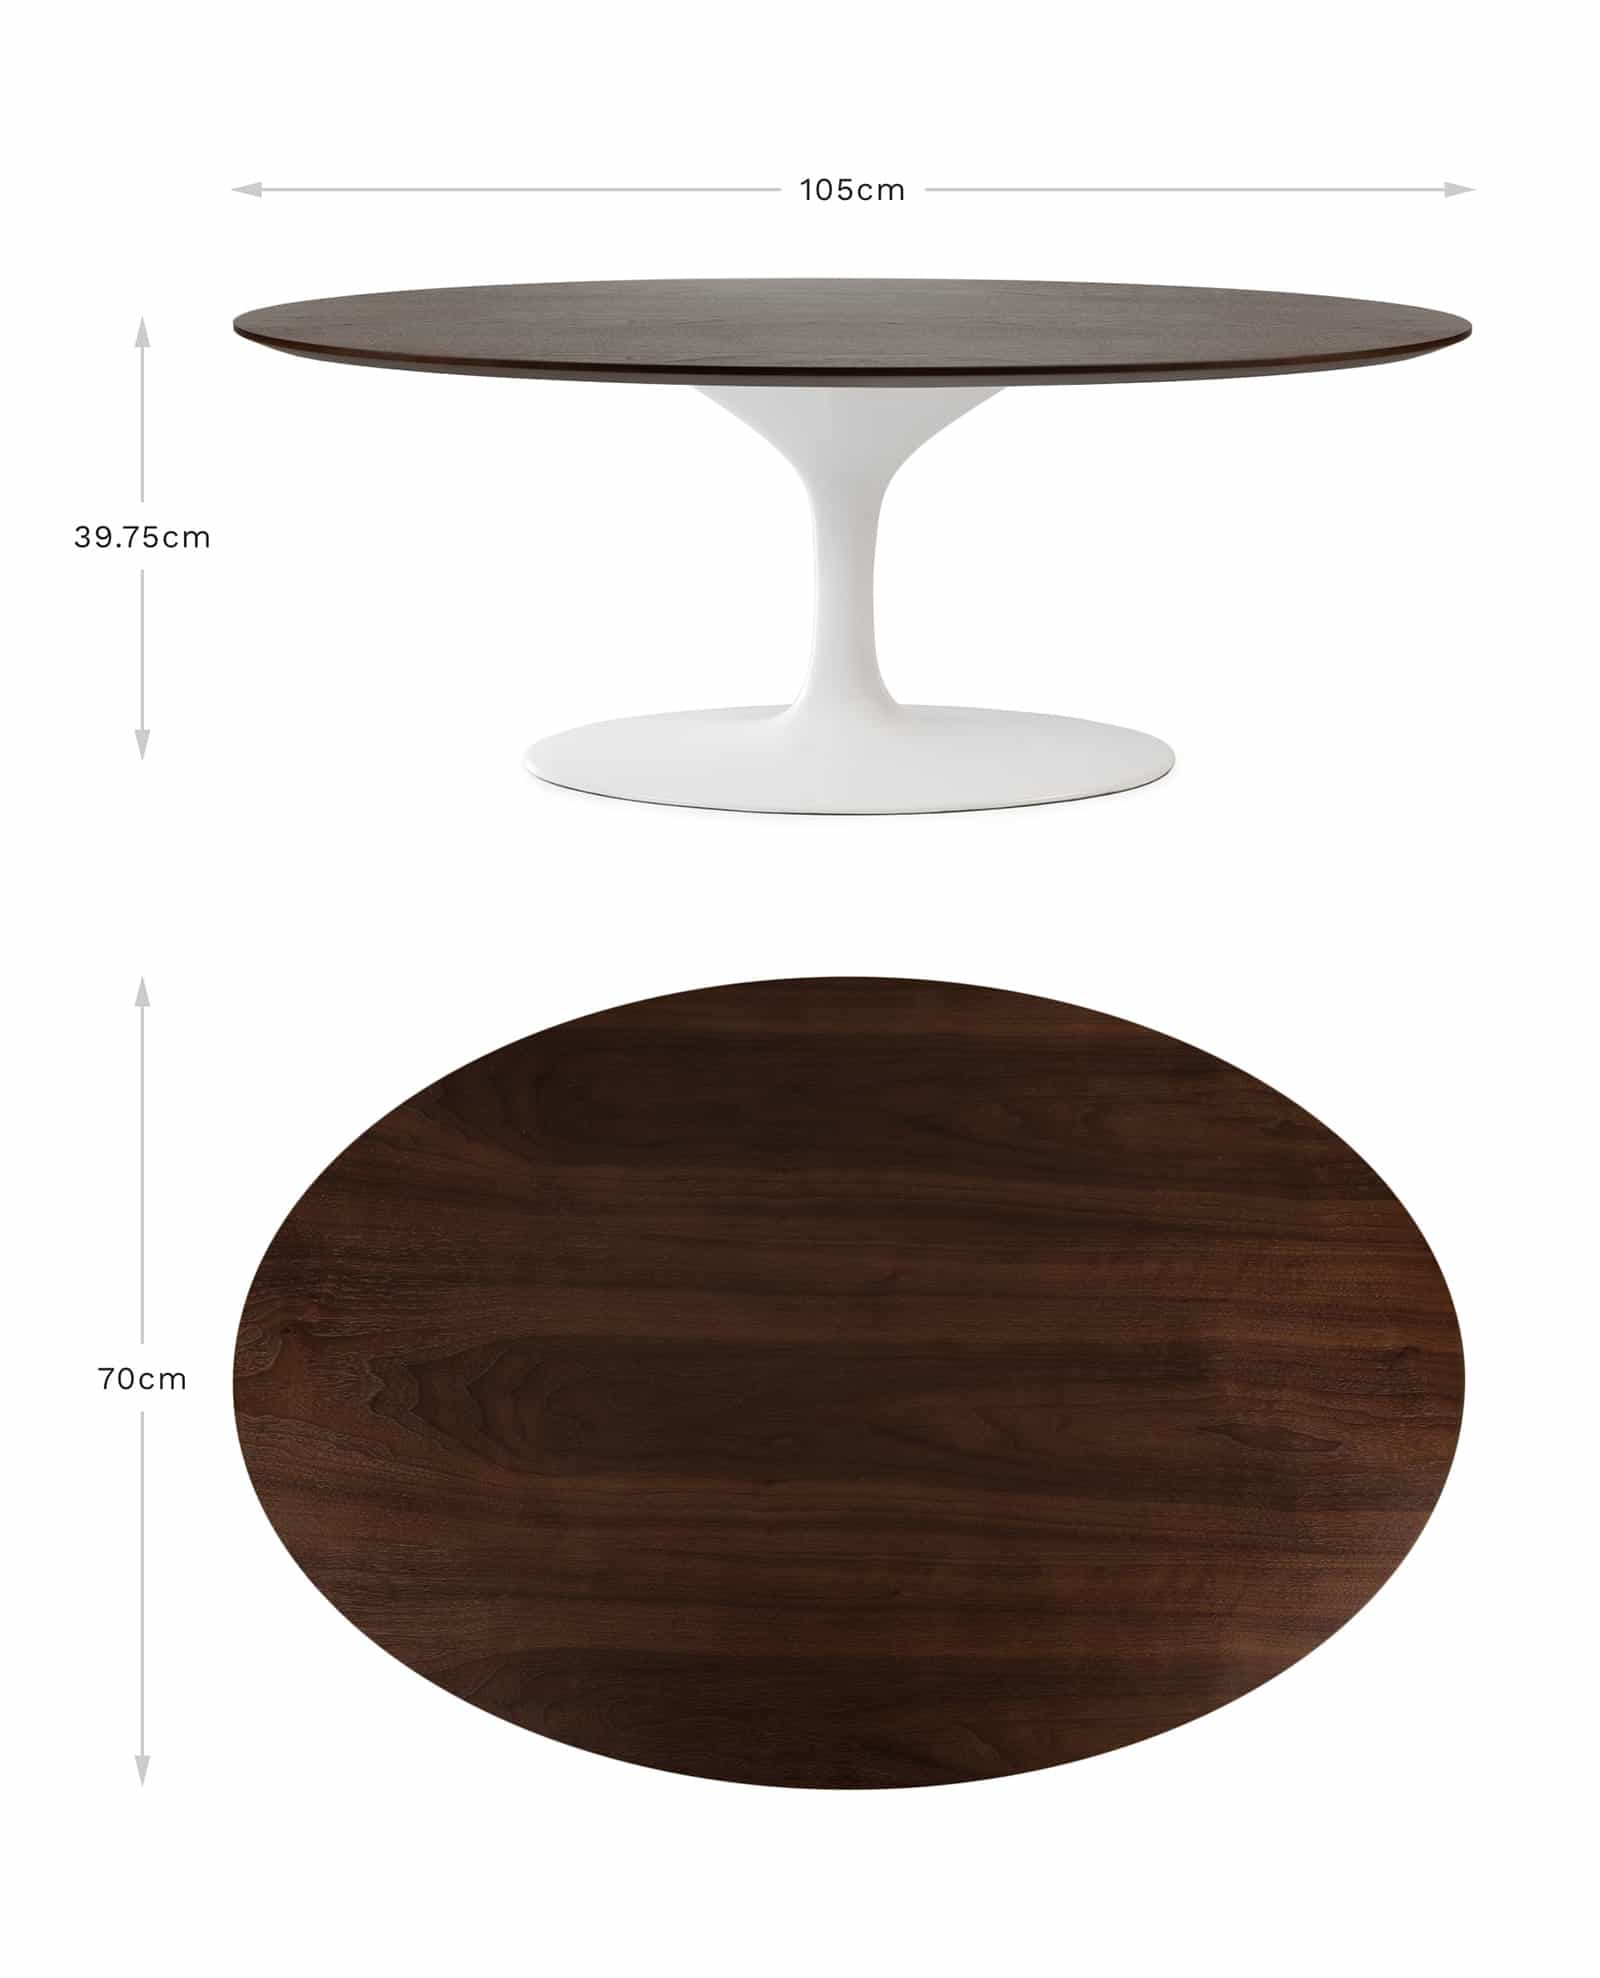 Amended for viewing on mobile and tablet, the dimensions banner for the oval Saarinen Tulip Coffee table with measurement arrows for height, width and depth